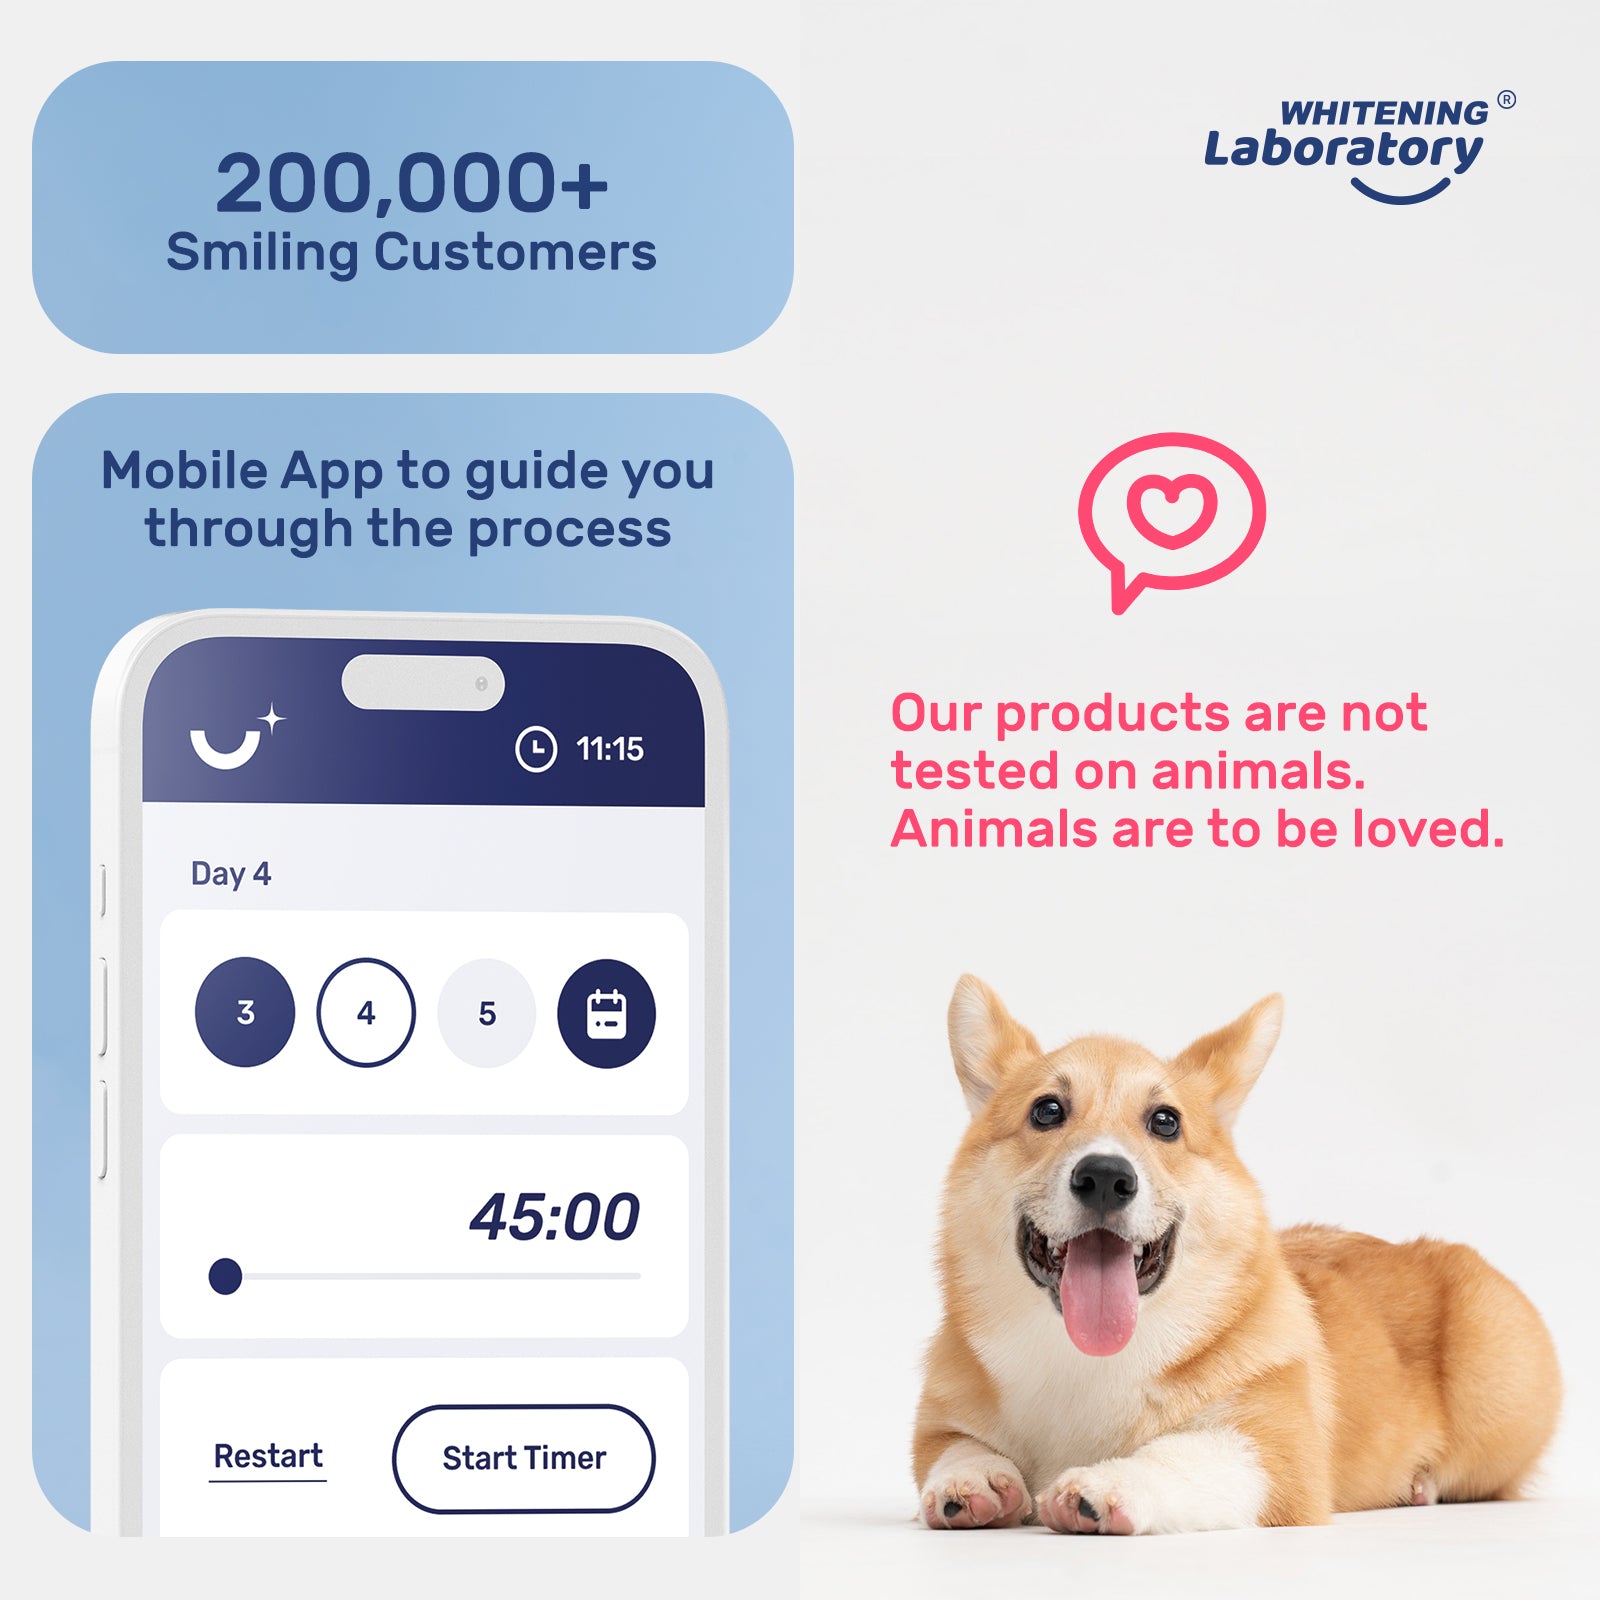 Whitening Laboratory mobile app screenshot showing a timer, along with a message about products not being tested on animals, featuring a happy dog.